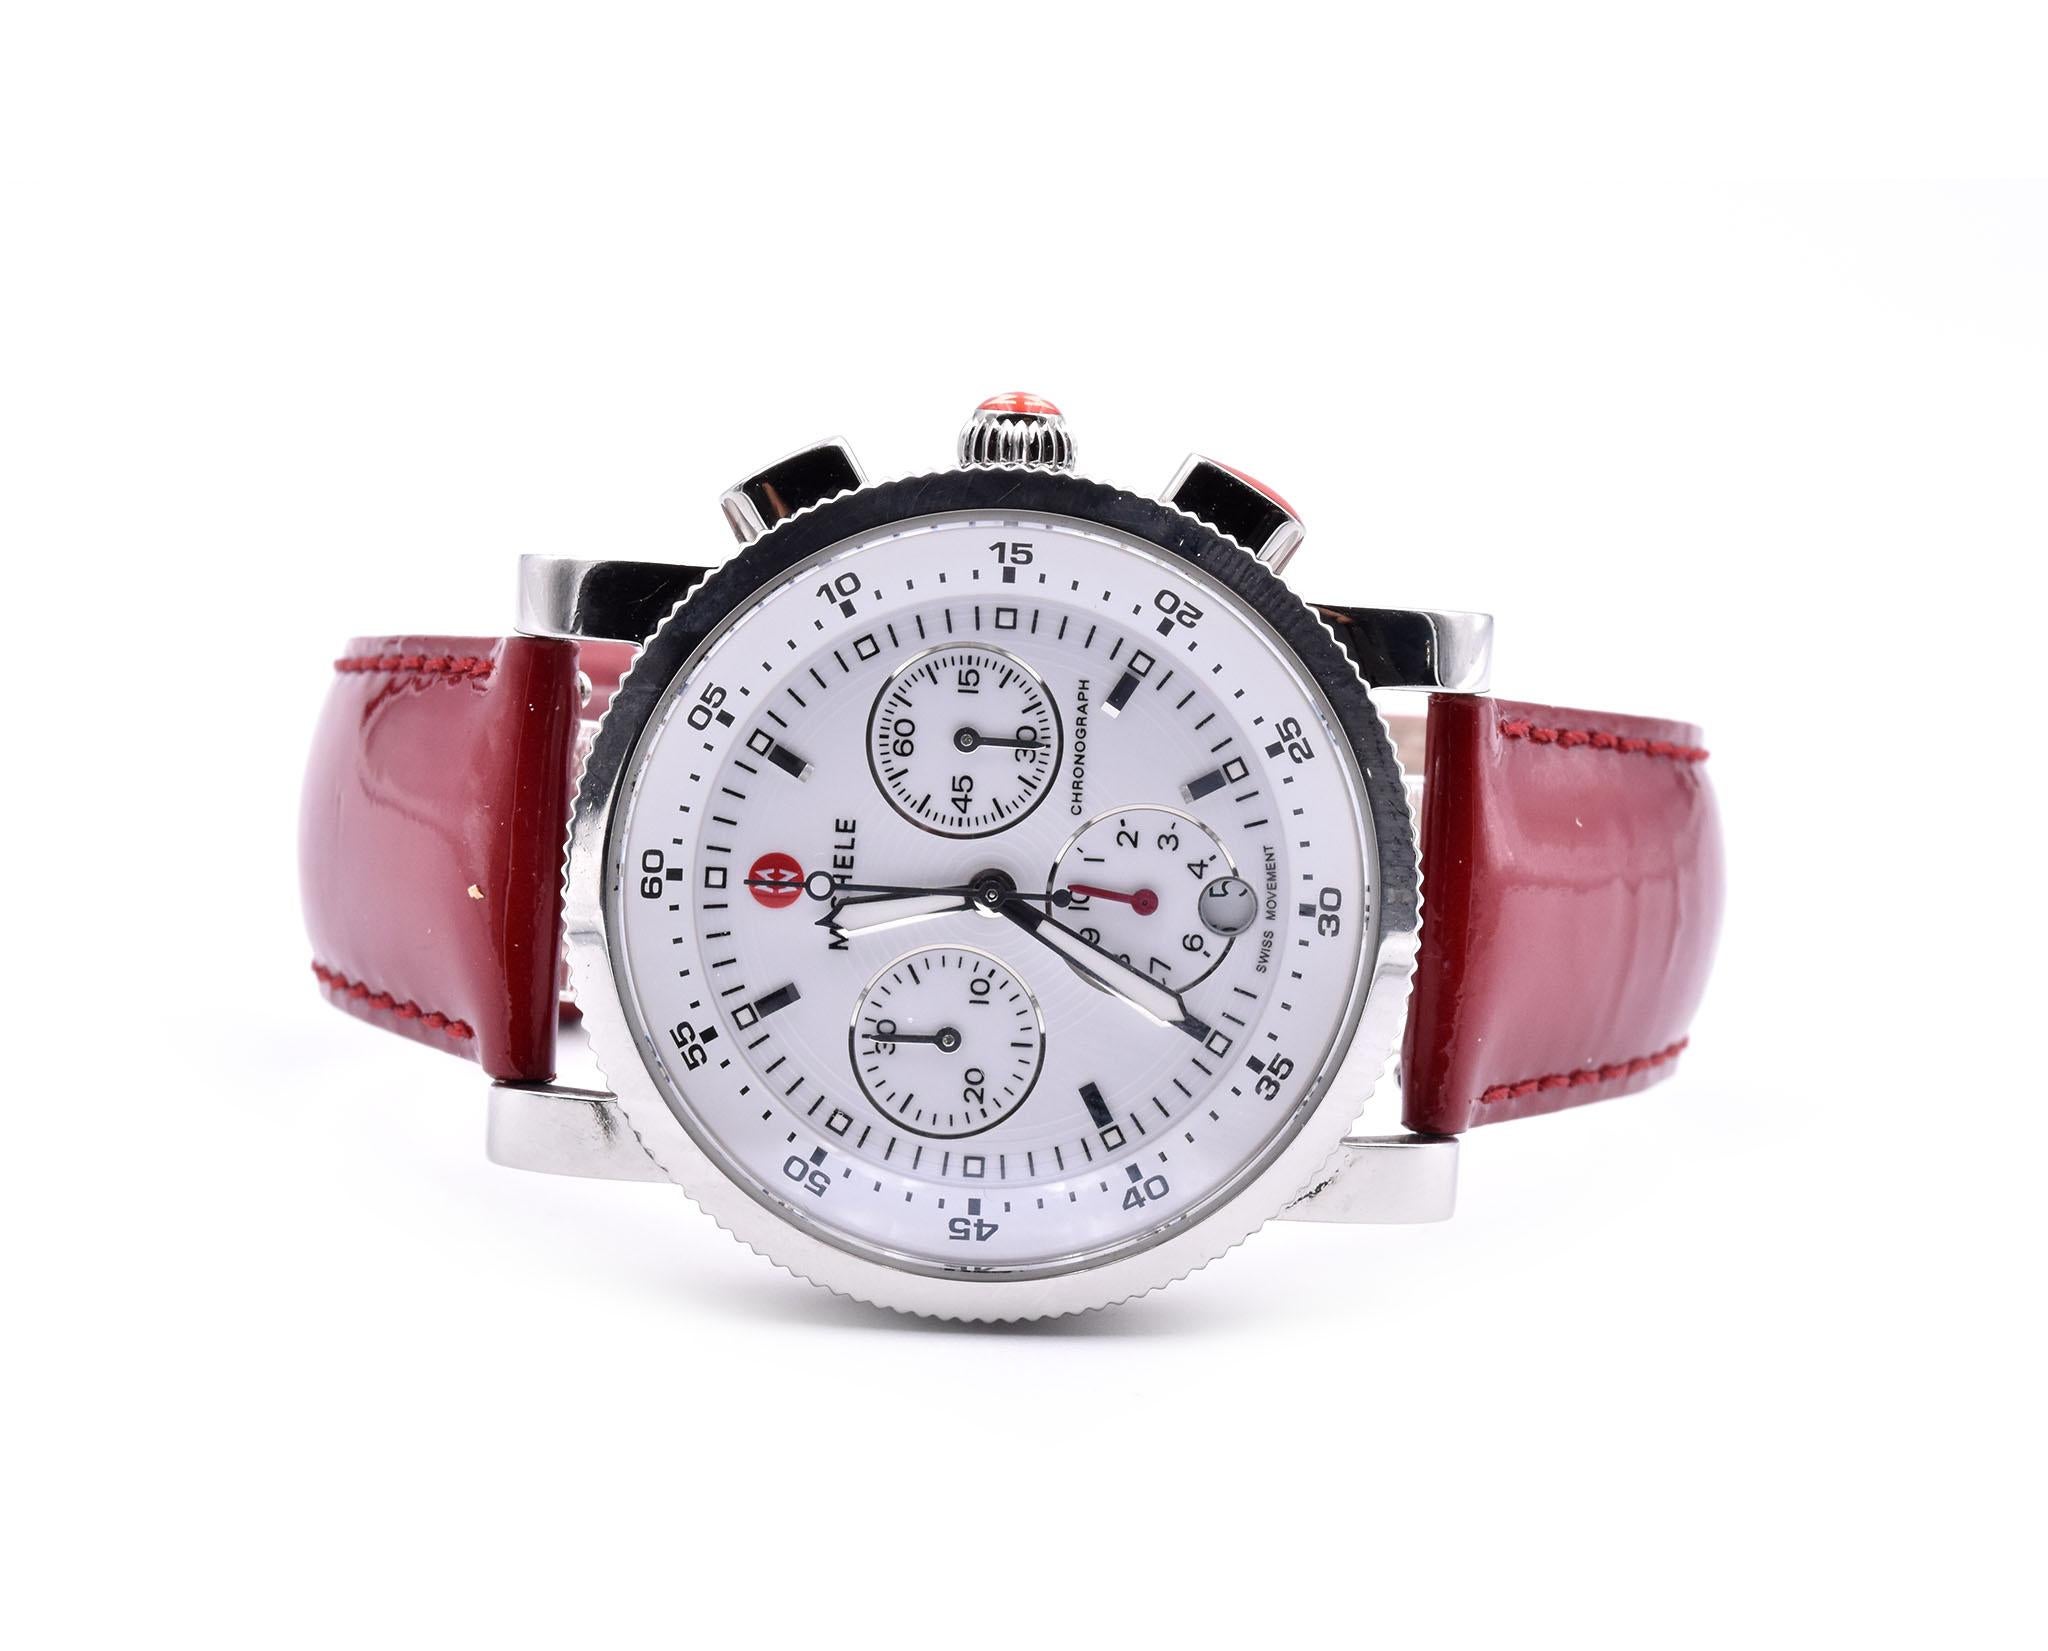 Movement: quartz
Function: hours, minutes, seconds, date, hour totalizer 
Case: 38mm round case, sapphire crystal
Dial: white 
Band: red interchangeable leather strap
Serial #: SS07XXX
Reference #: MW01C00D9001

No Box or Papers.
Guaranteed to be